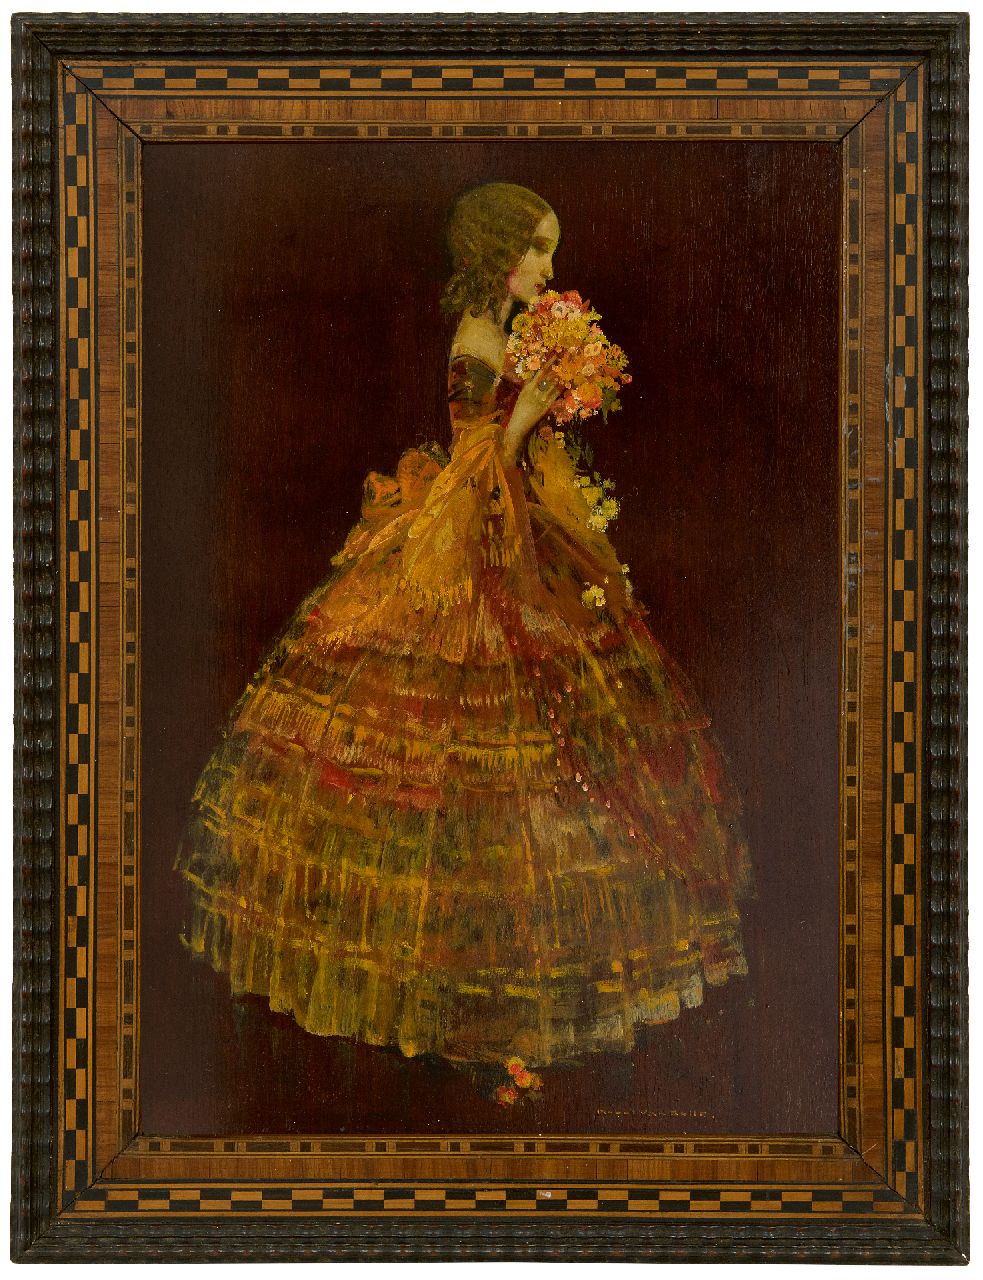 Belle K. van | Karel van Belle | Paintings offered for sale | Woman in yellow ball gown, oil on panel 41.8 x 29.6 cm, signed l.r.